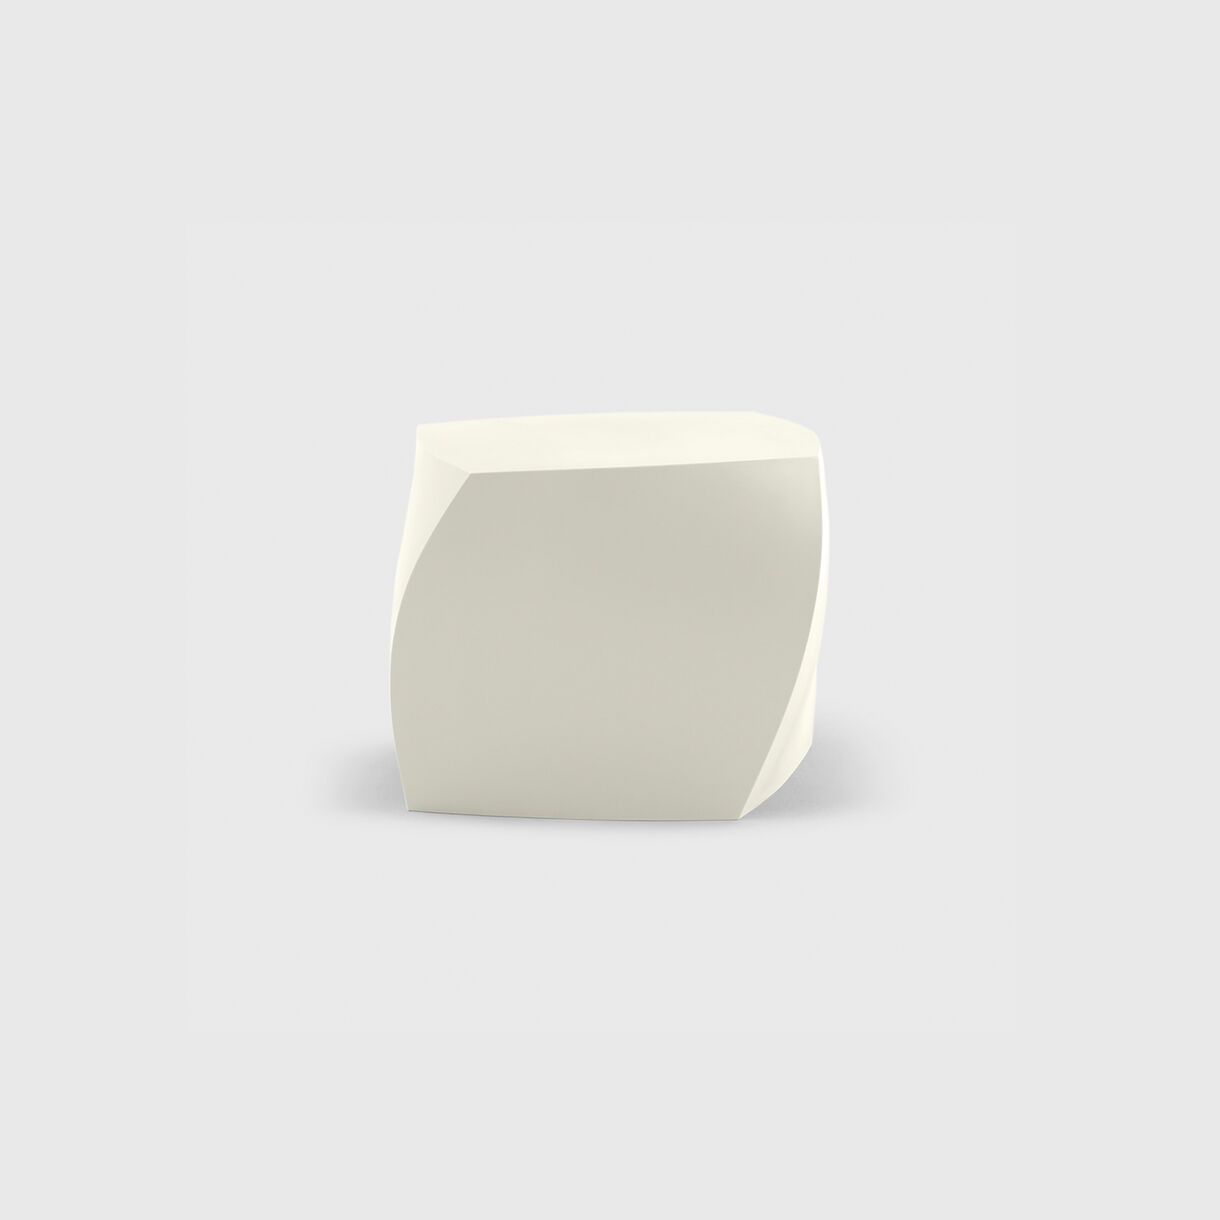 Gehry Left Twist Cube, White